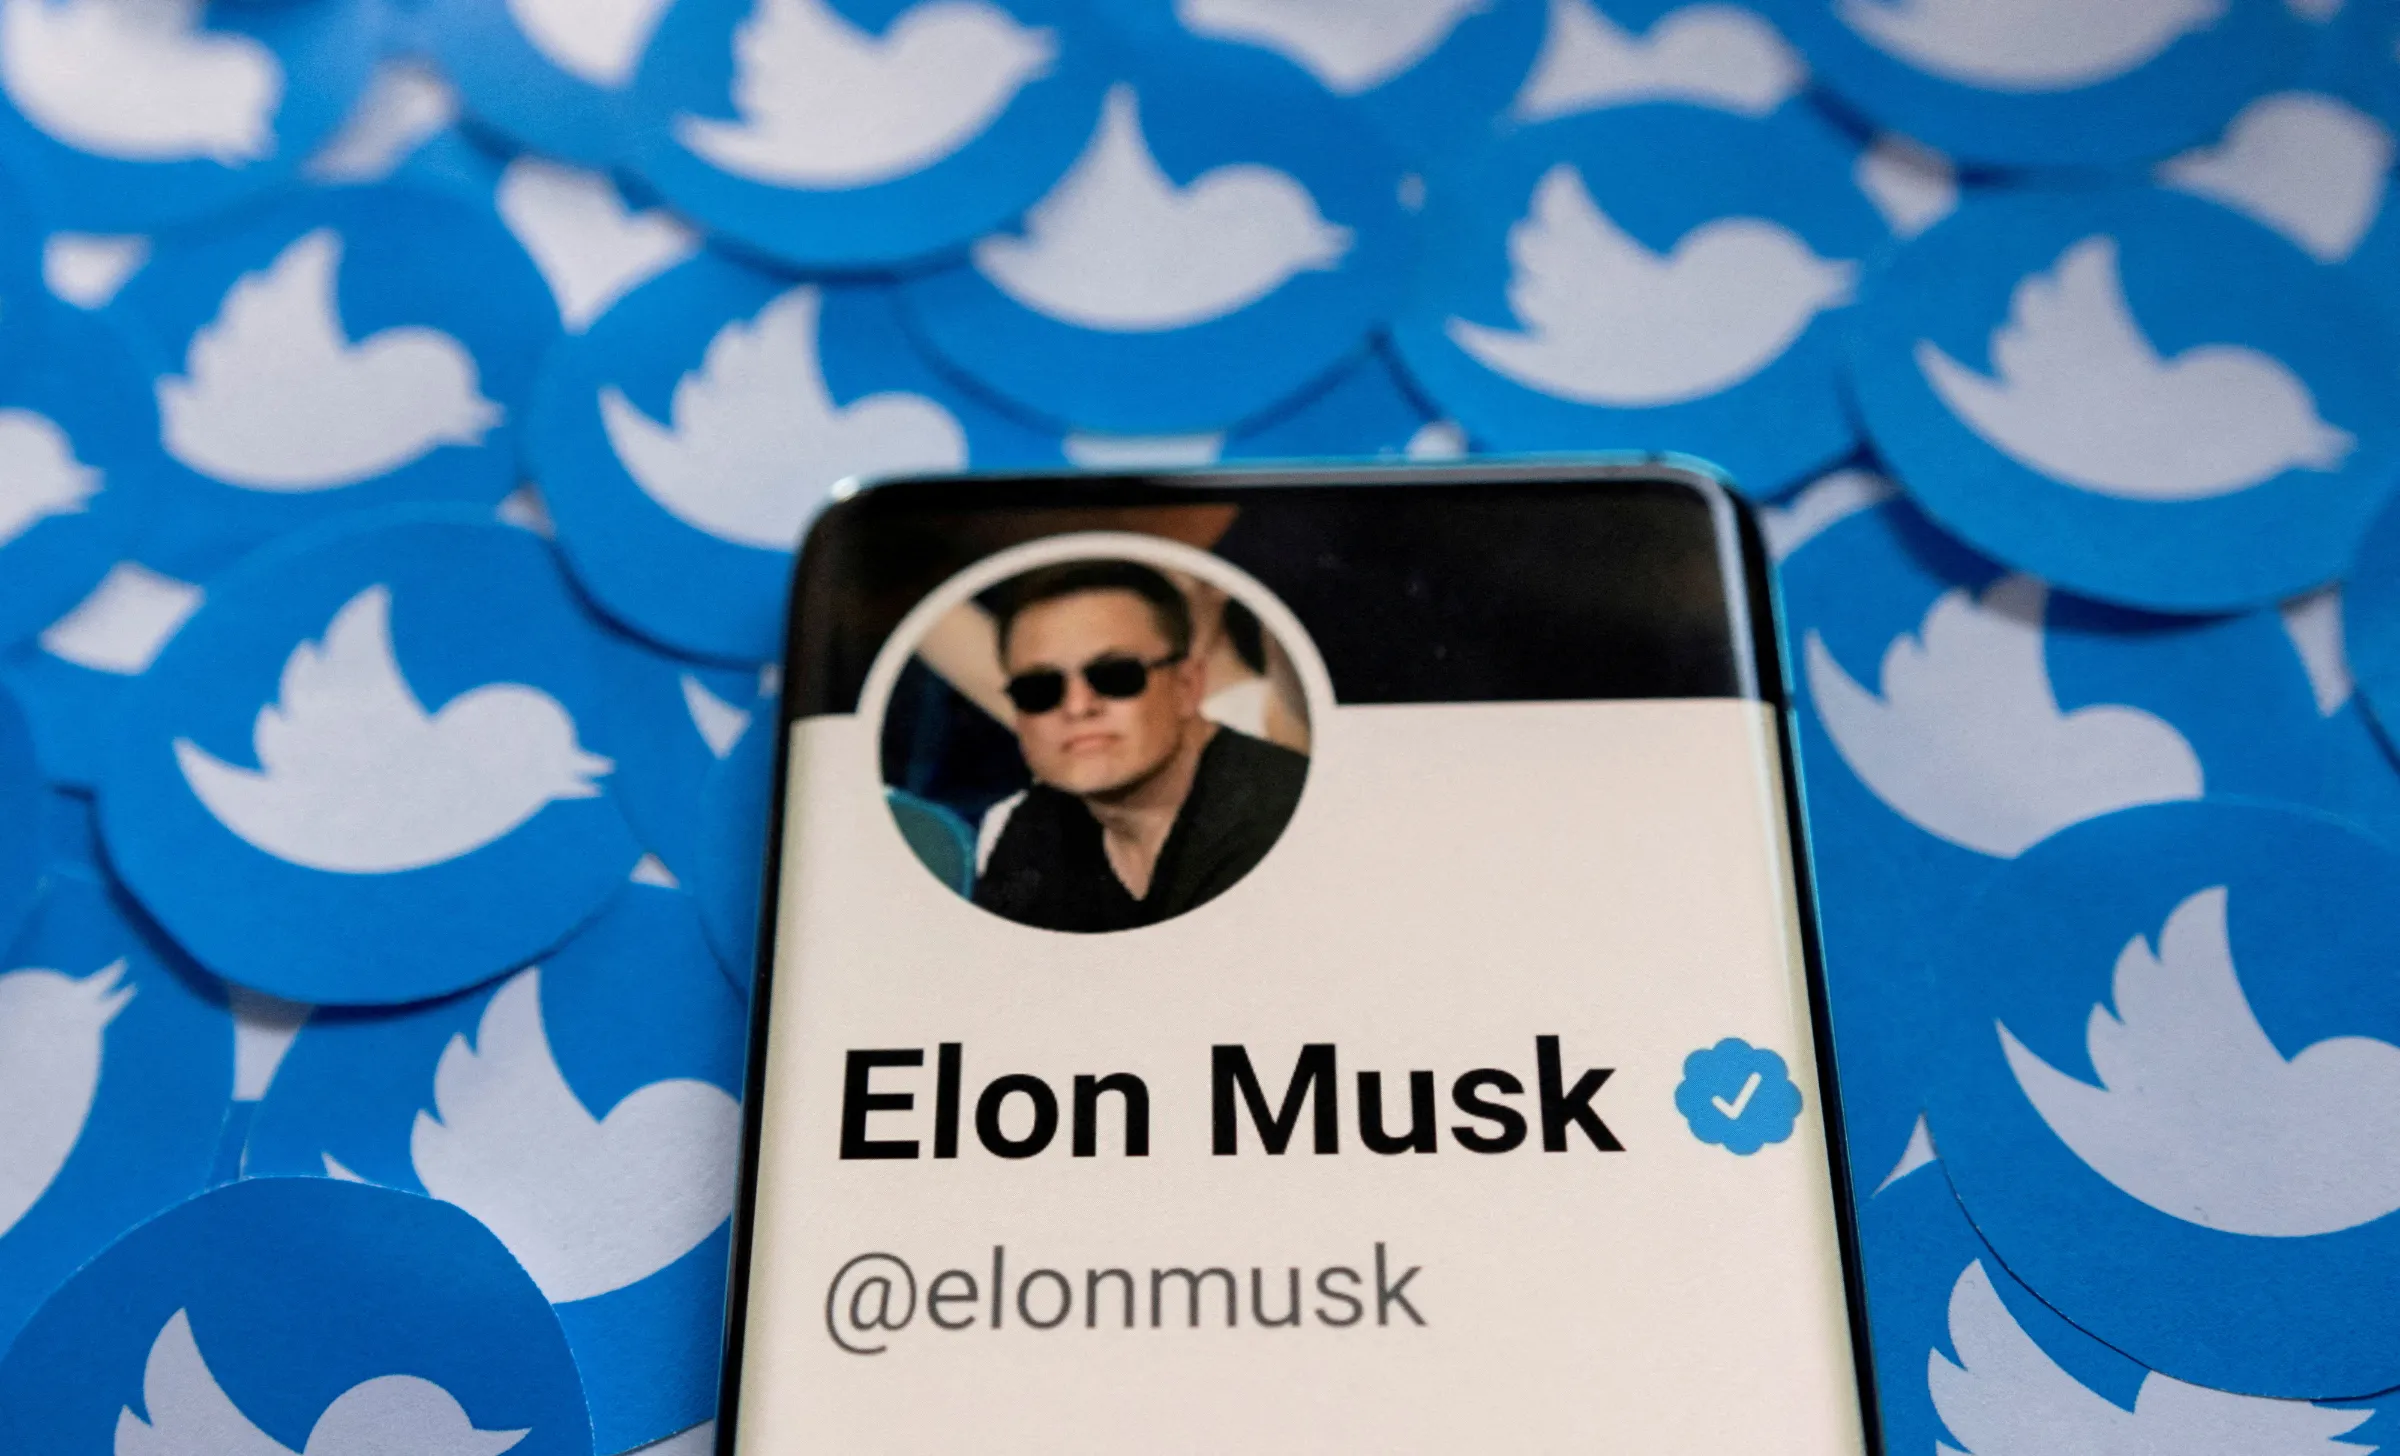 Elon Musk's Twitter profile is seen on a smartphone placed on printed Twitter logos in this picture illustration taken April 28, 2022